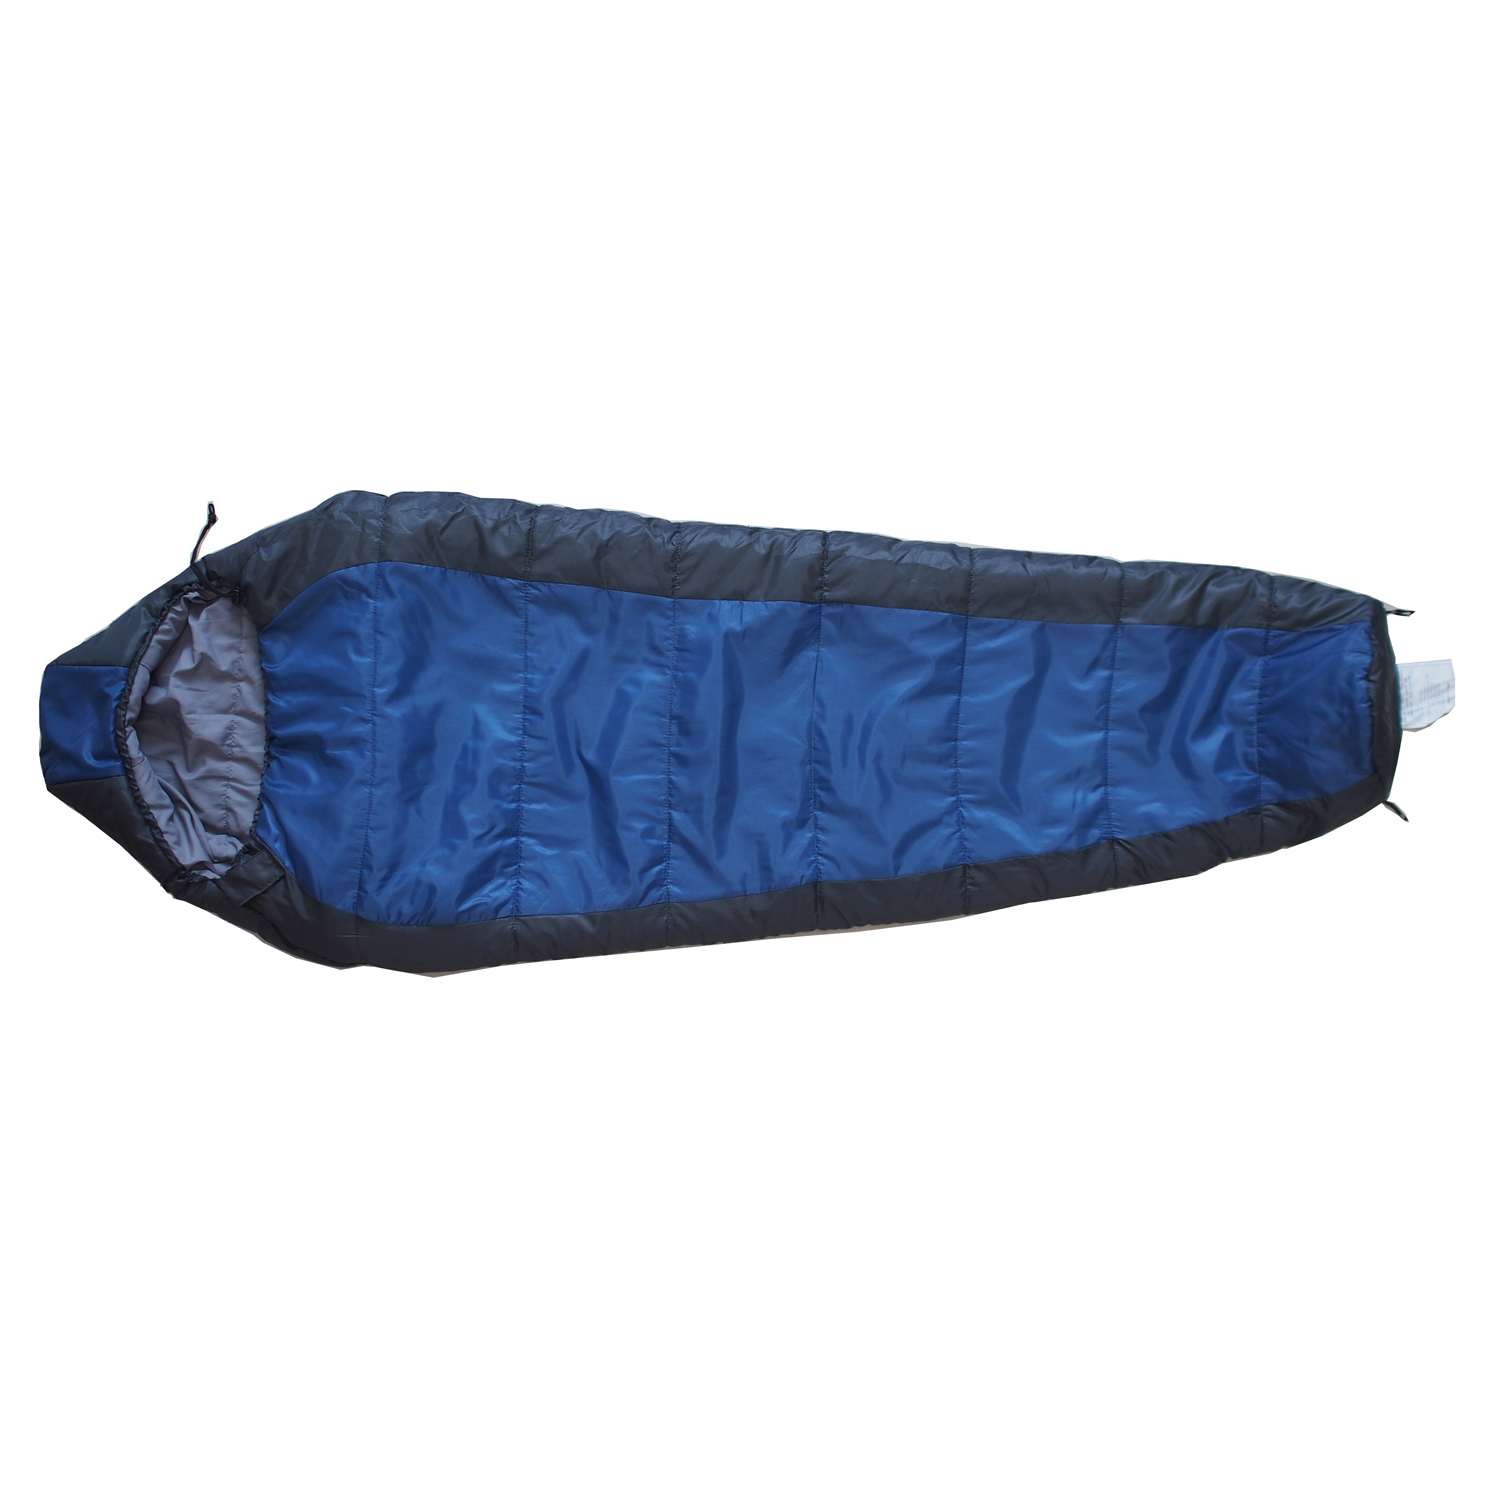 Ozark Trail 30F with Soft Liner Camping Mummy Sleeping Bag for Adults, Blue - image 4 of 13